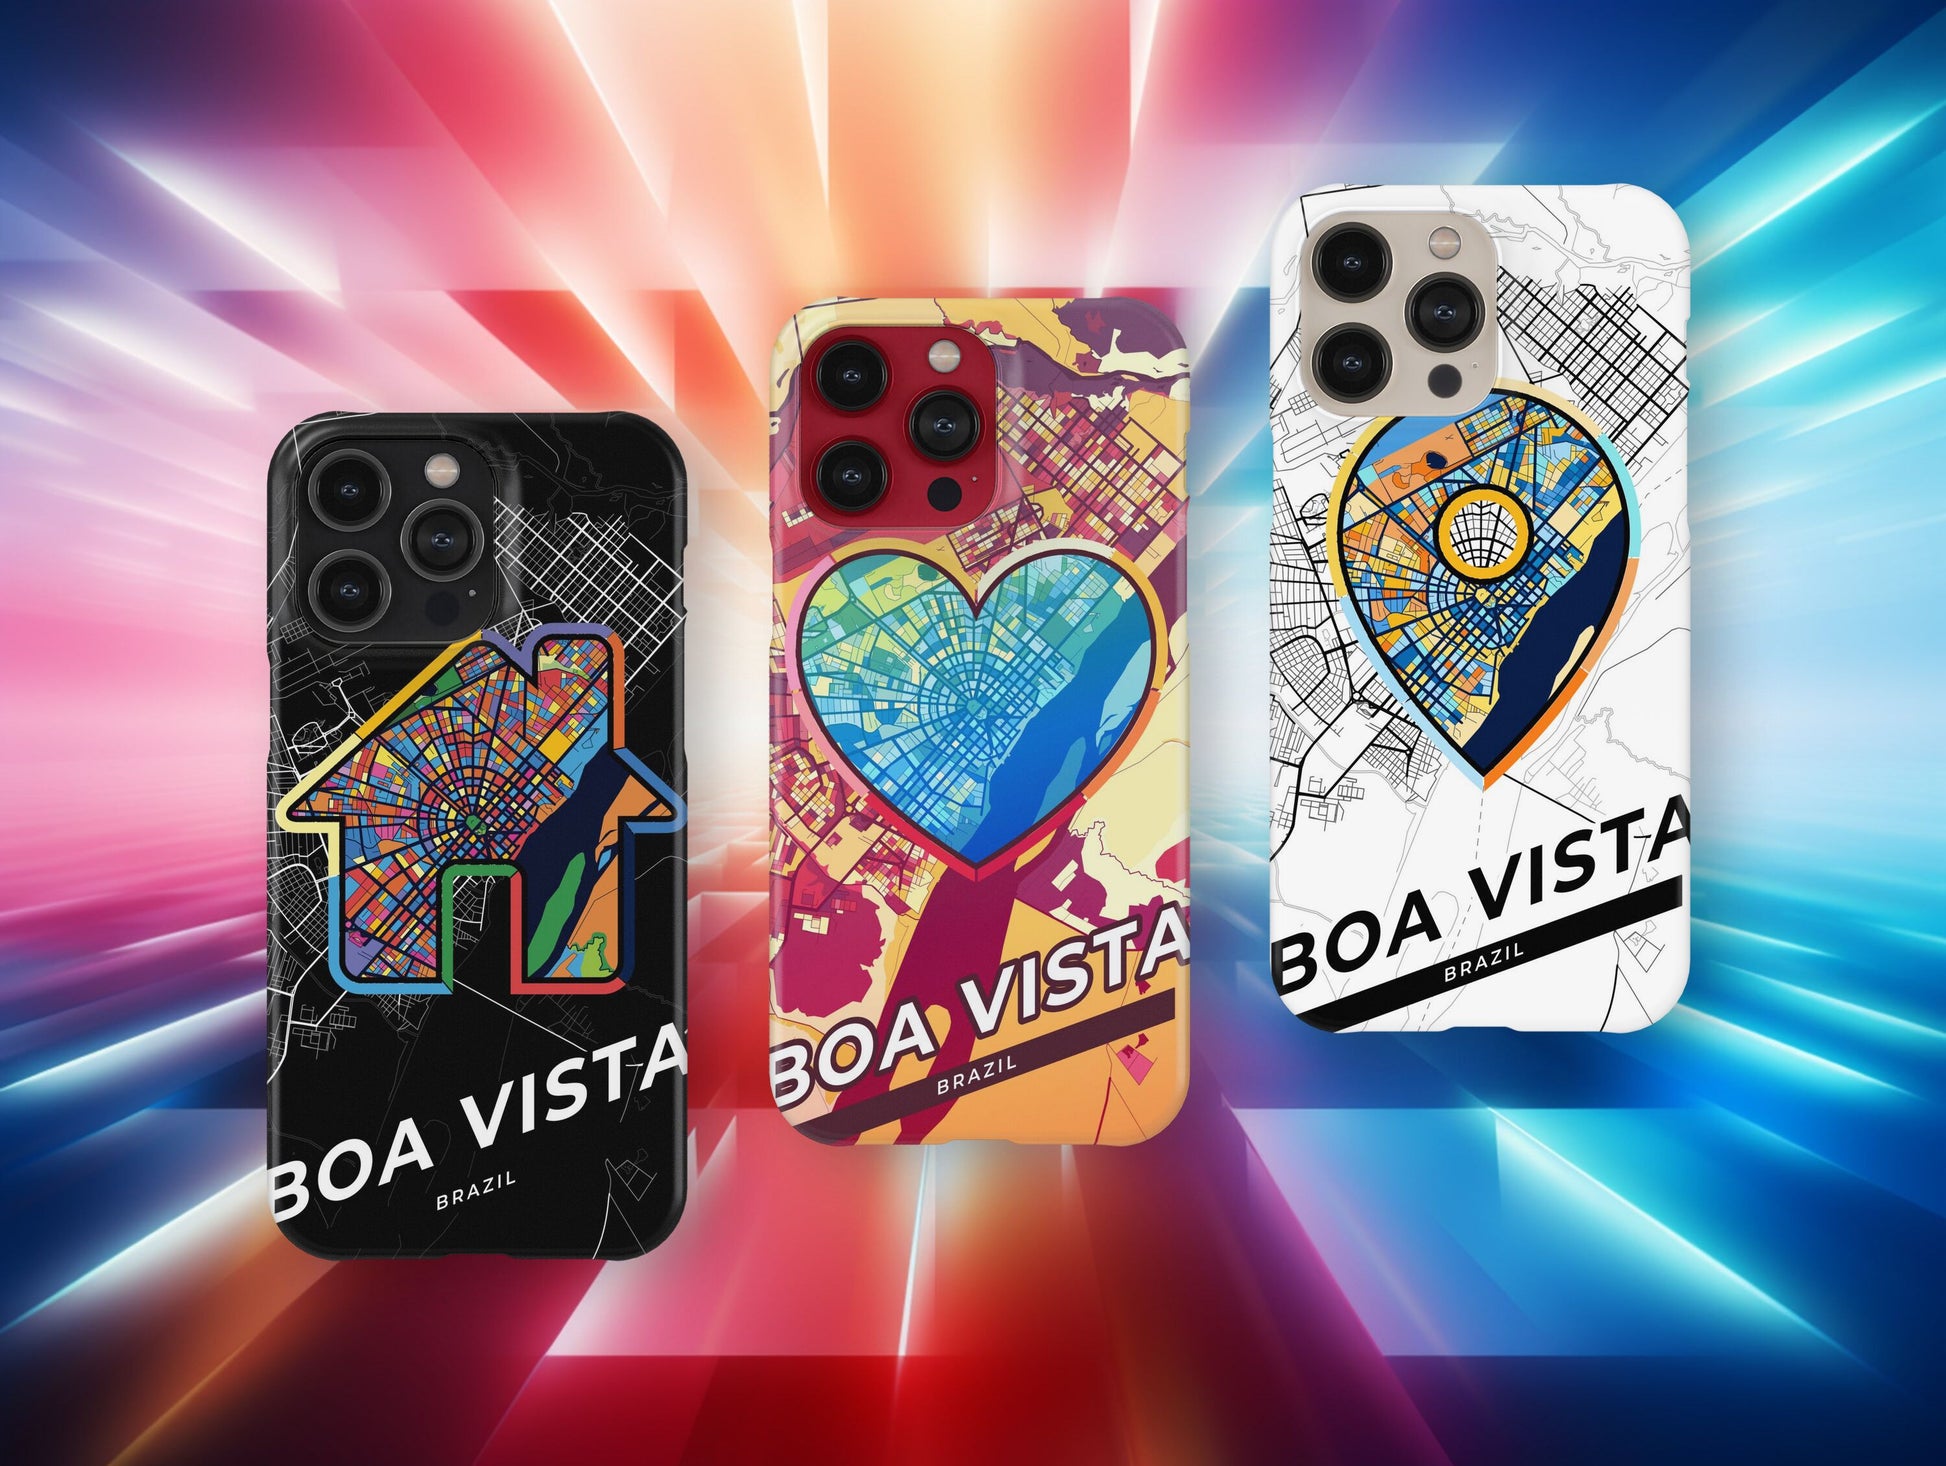 Boa Vista Brazil slim phone case with colorful icon. Birthday, wedding or housewarming gift. Couple match cases.